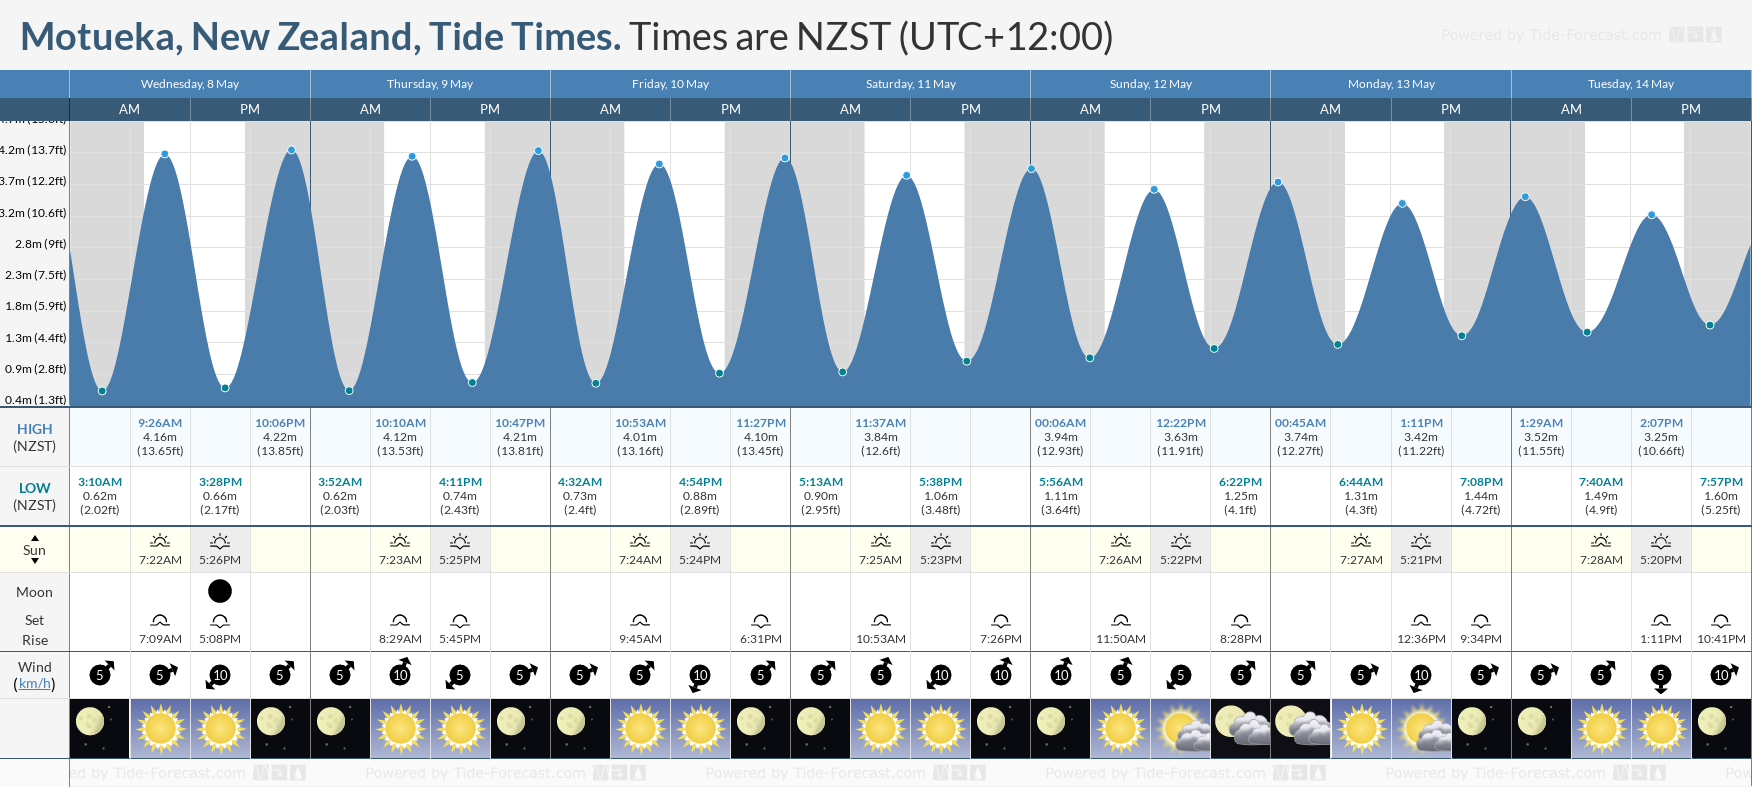 Motueka, New Zealand Tide Chart including high and low tide tide times for the next 7 days